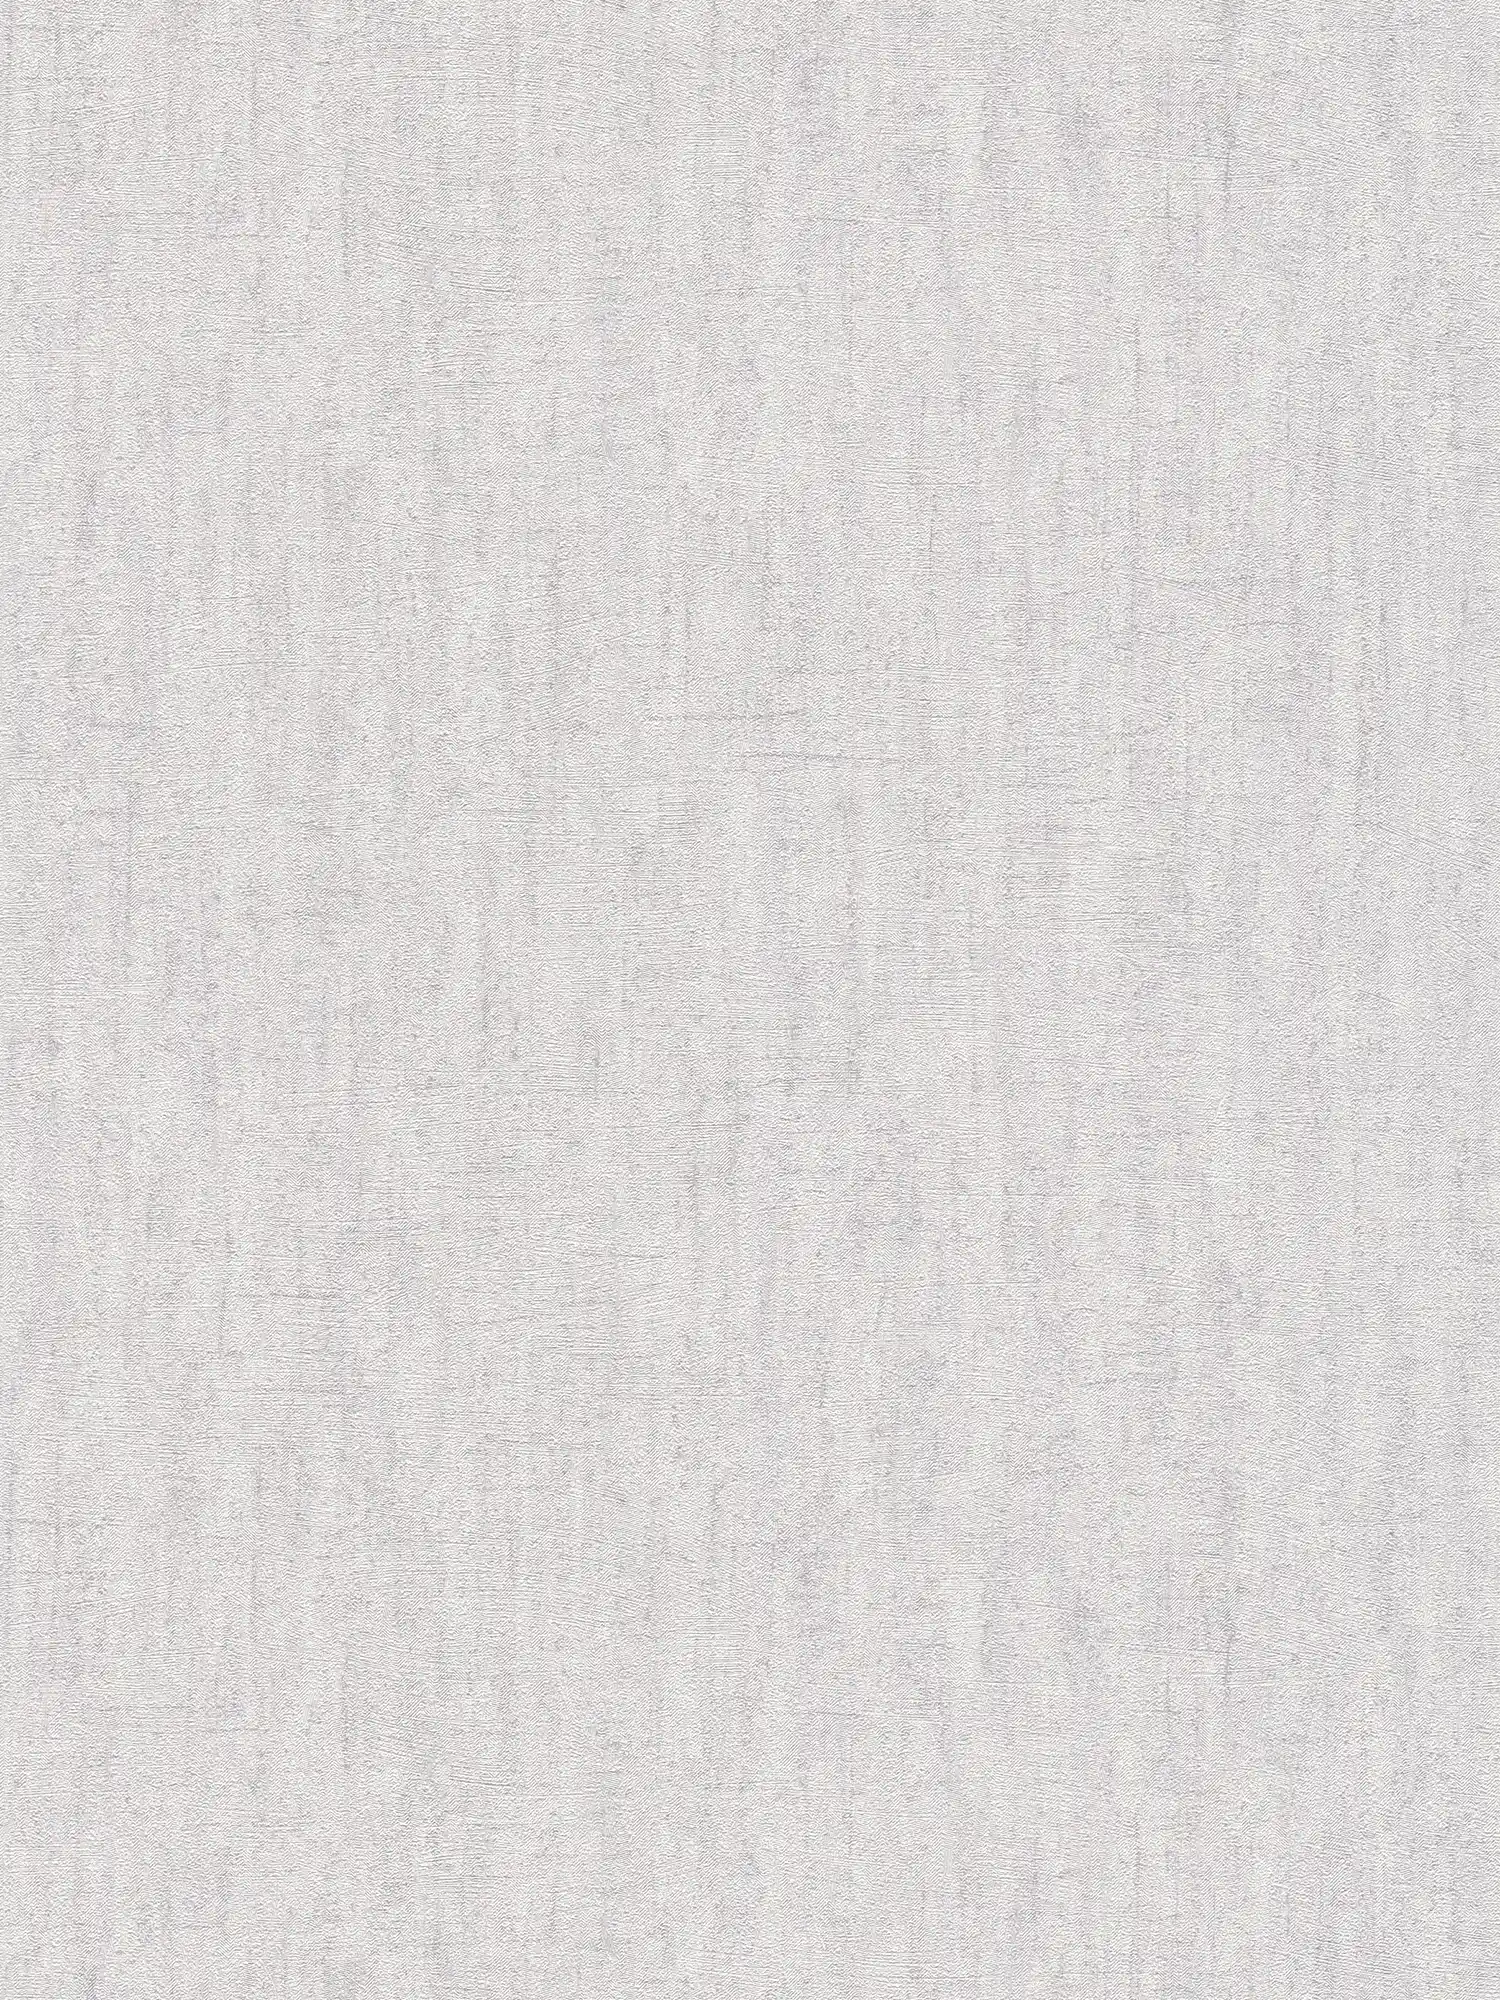 Light grey non-woven wallpaper glossy with textured pattern - grey
